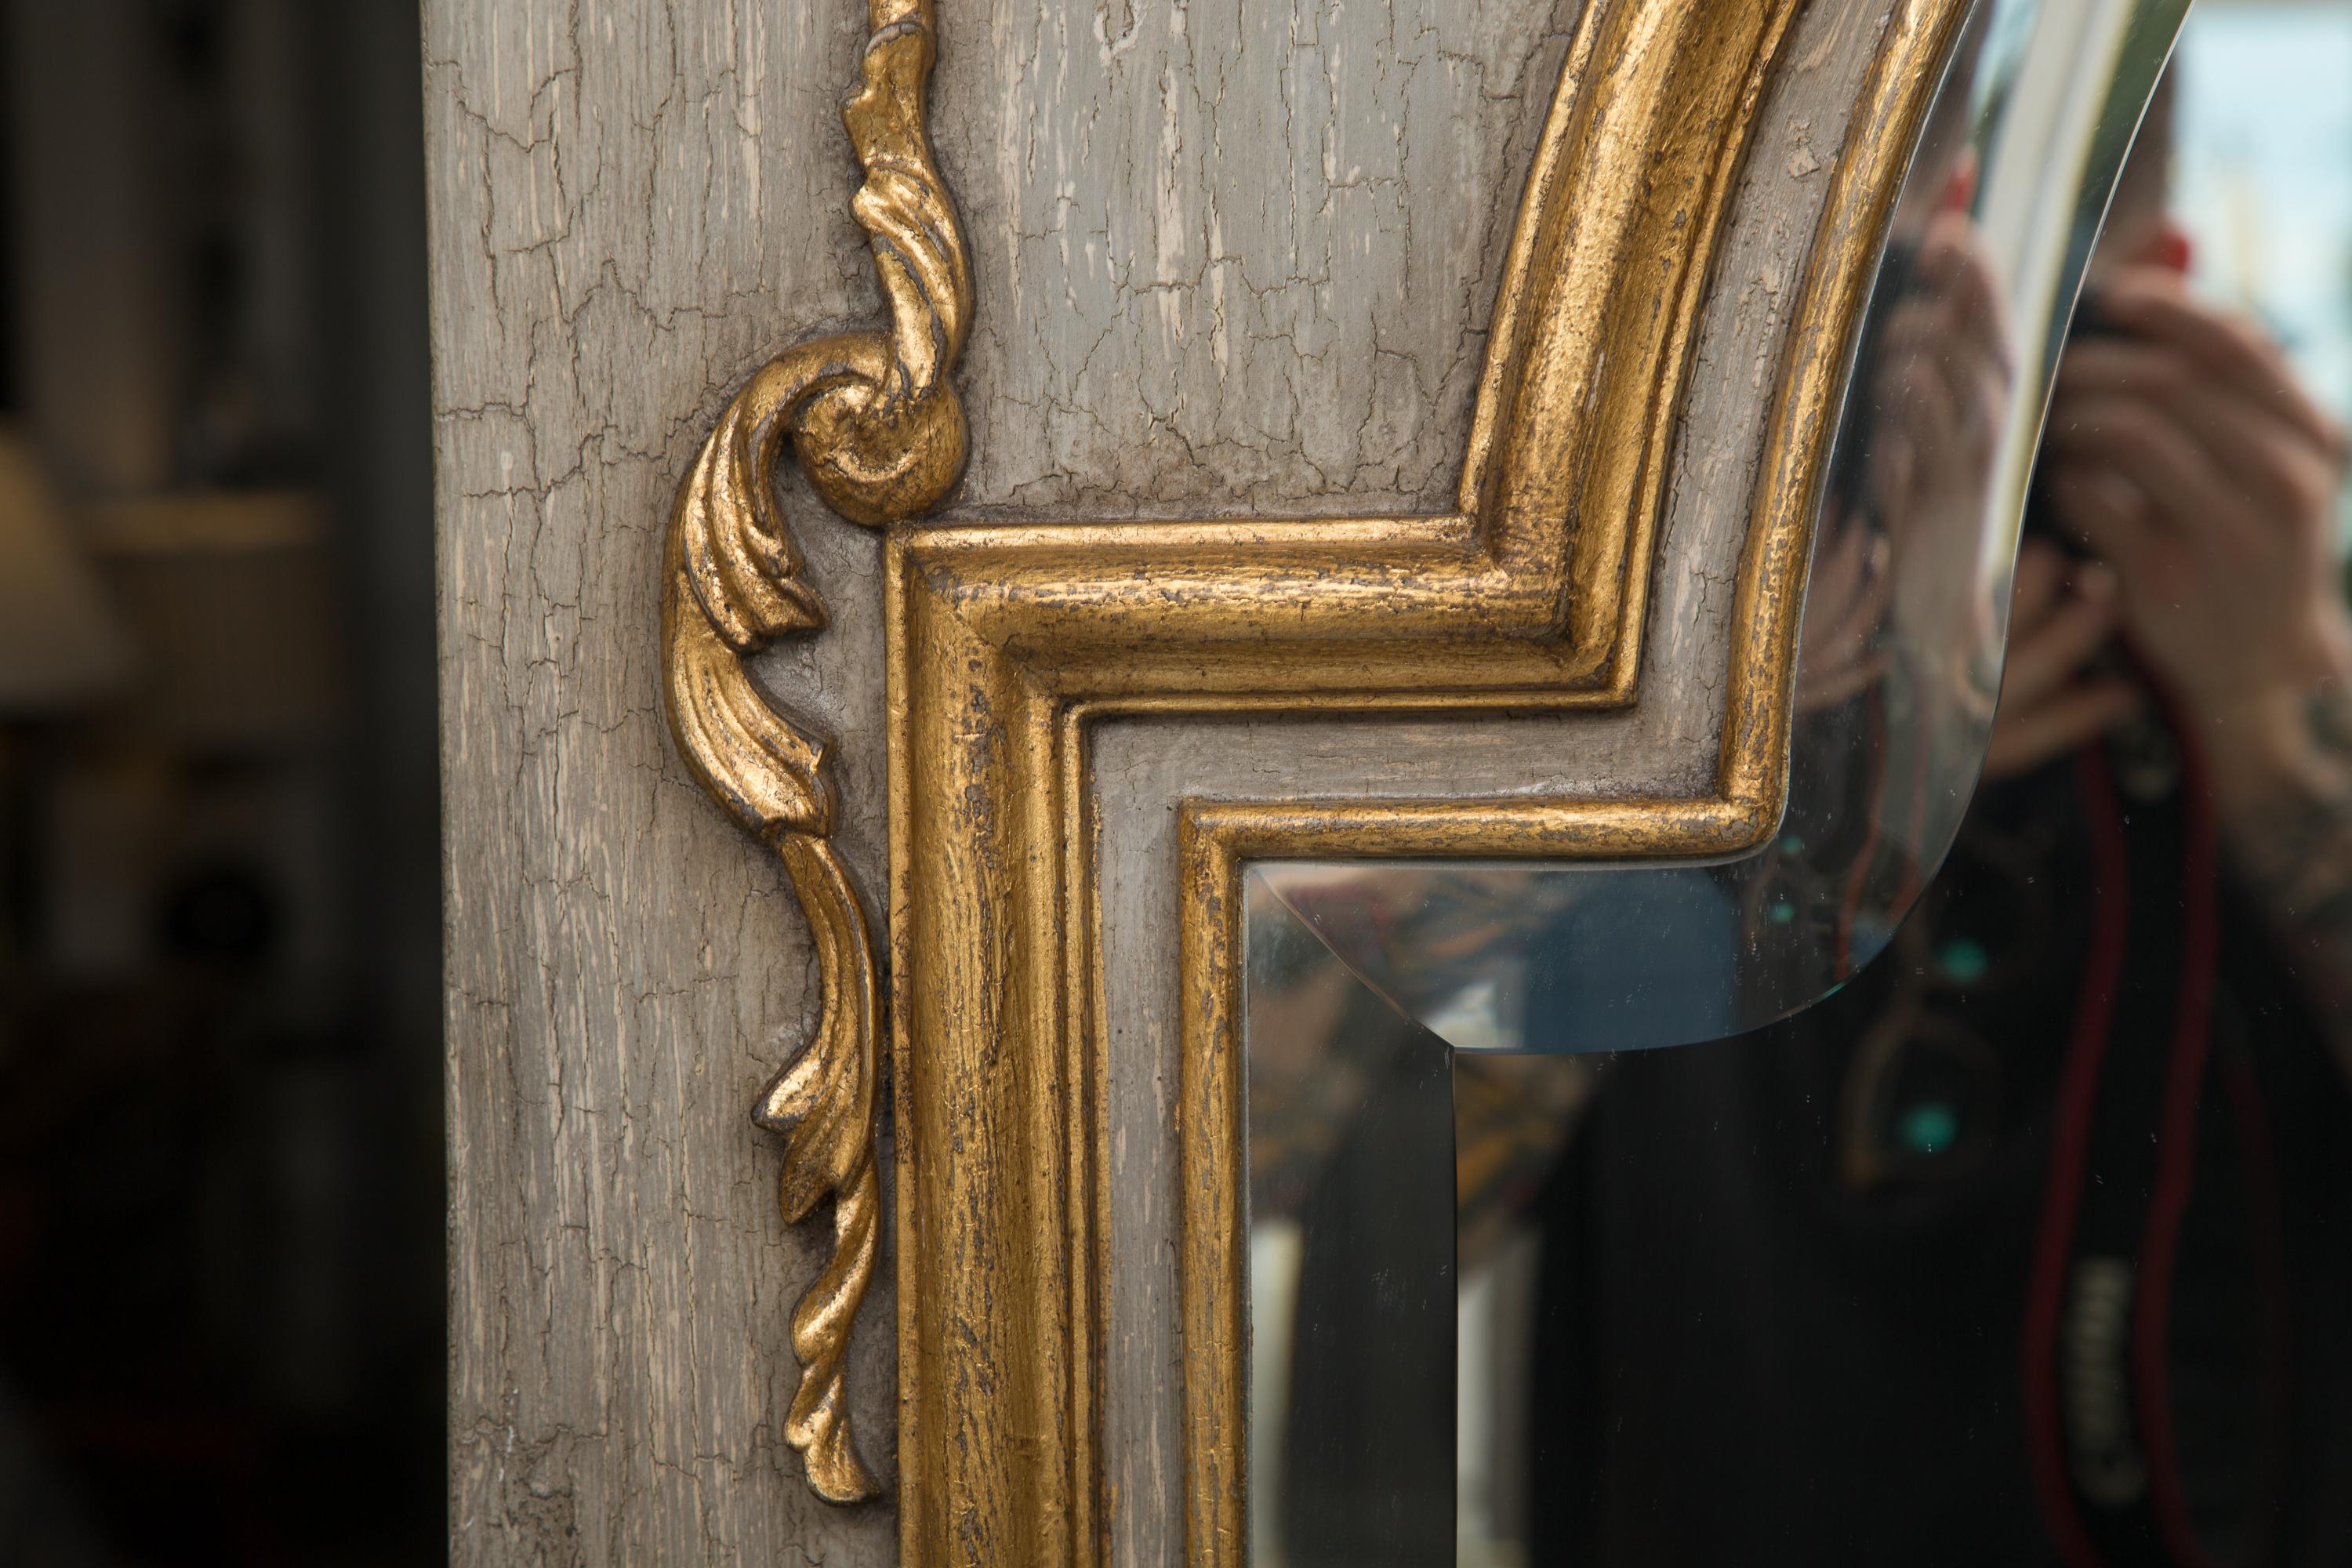 Unknown French Trumeau Mirror with Crackled Finish and Gilt Highlights